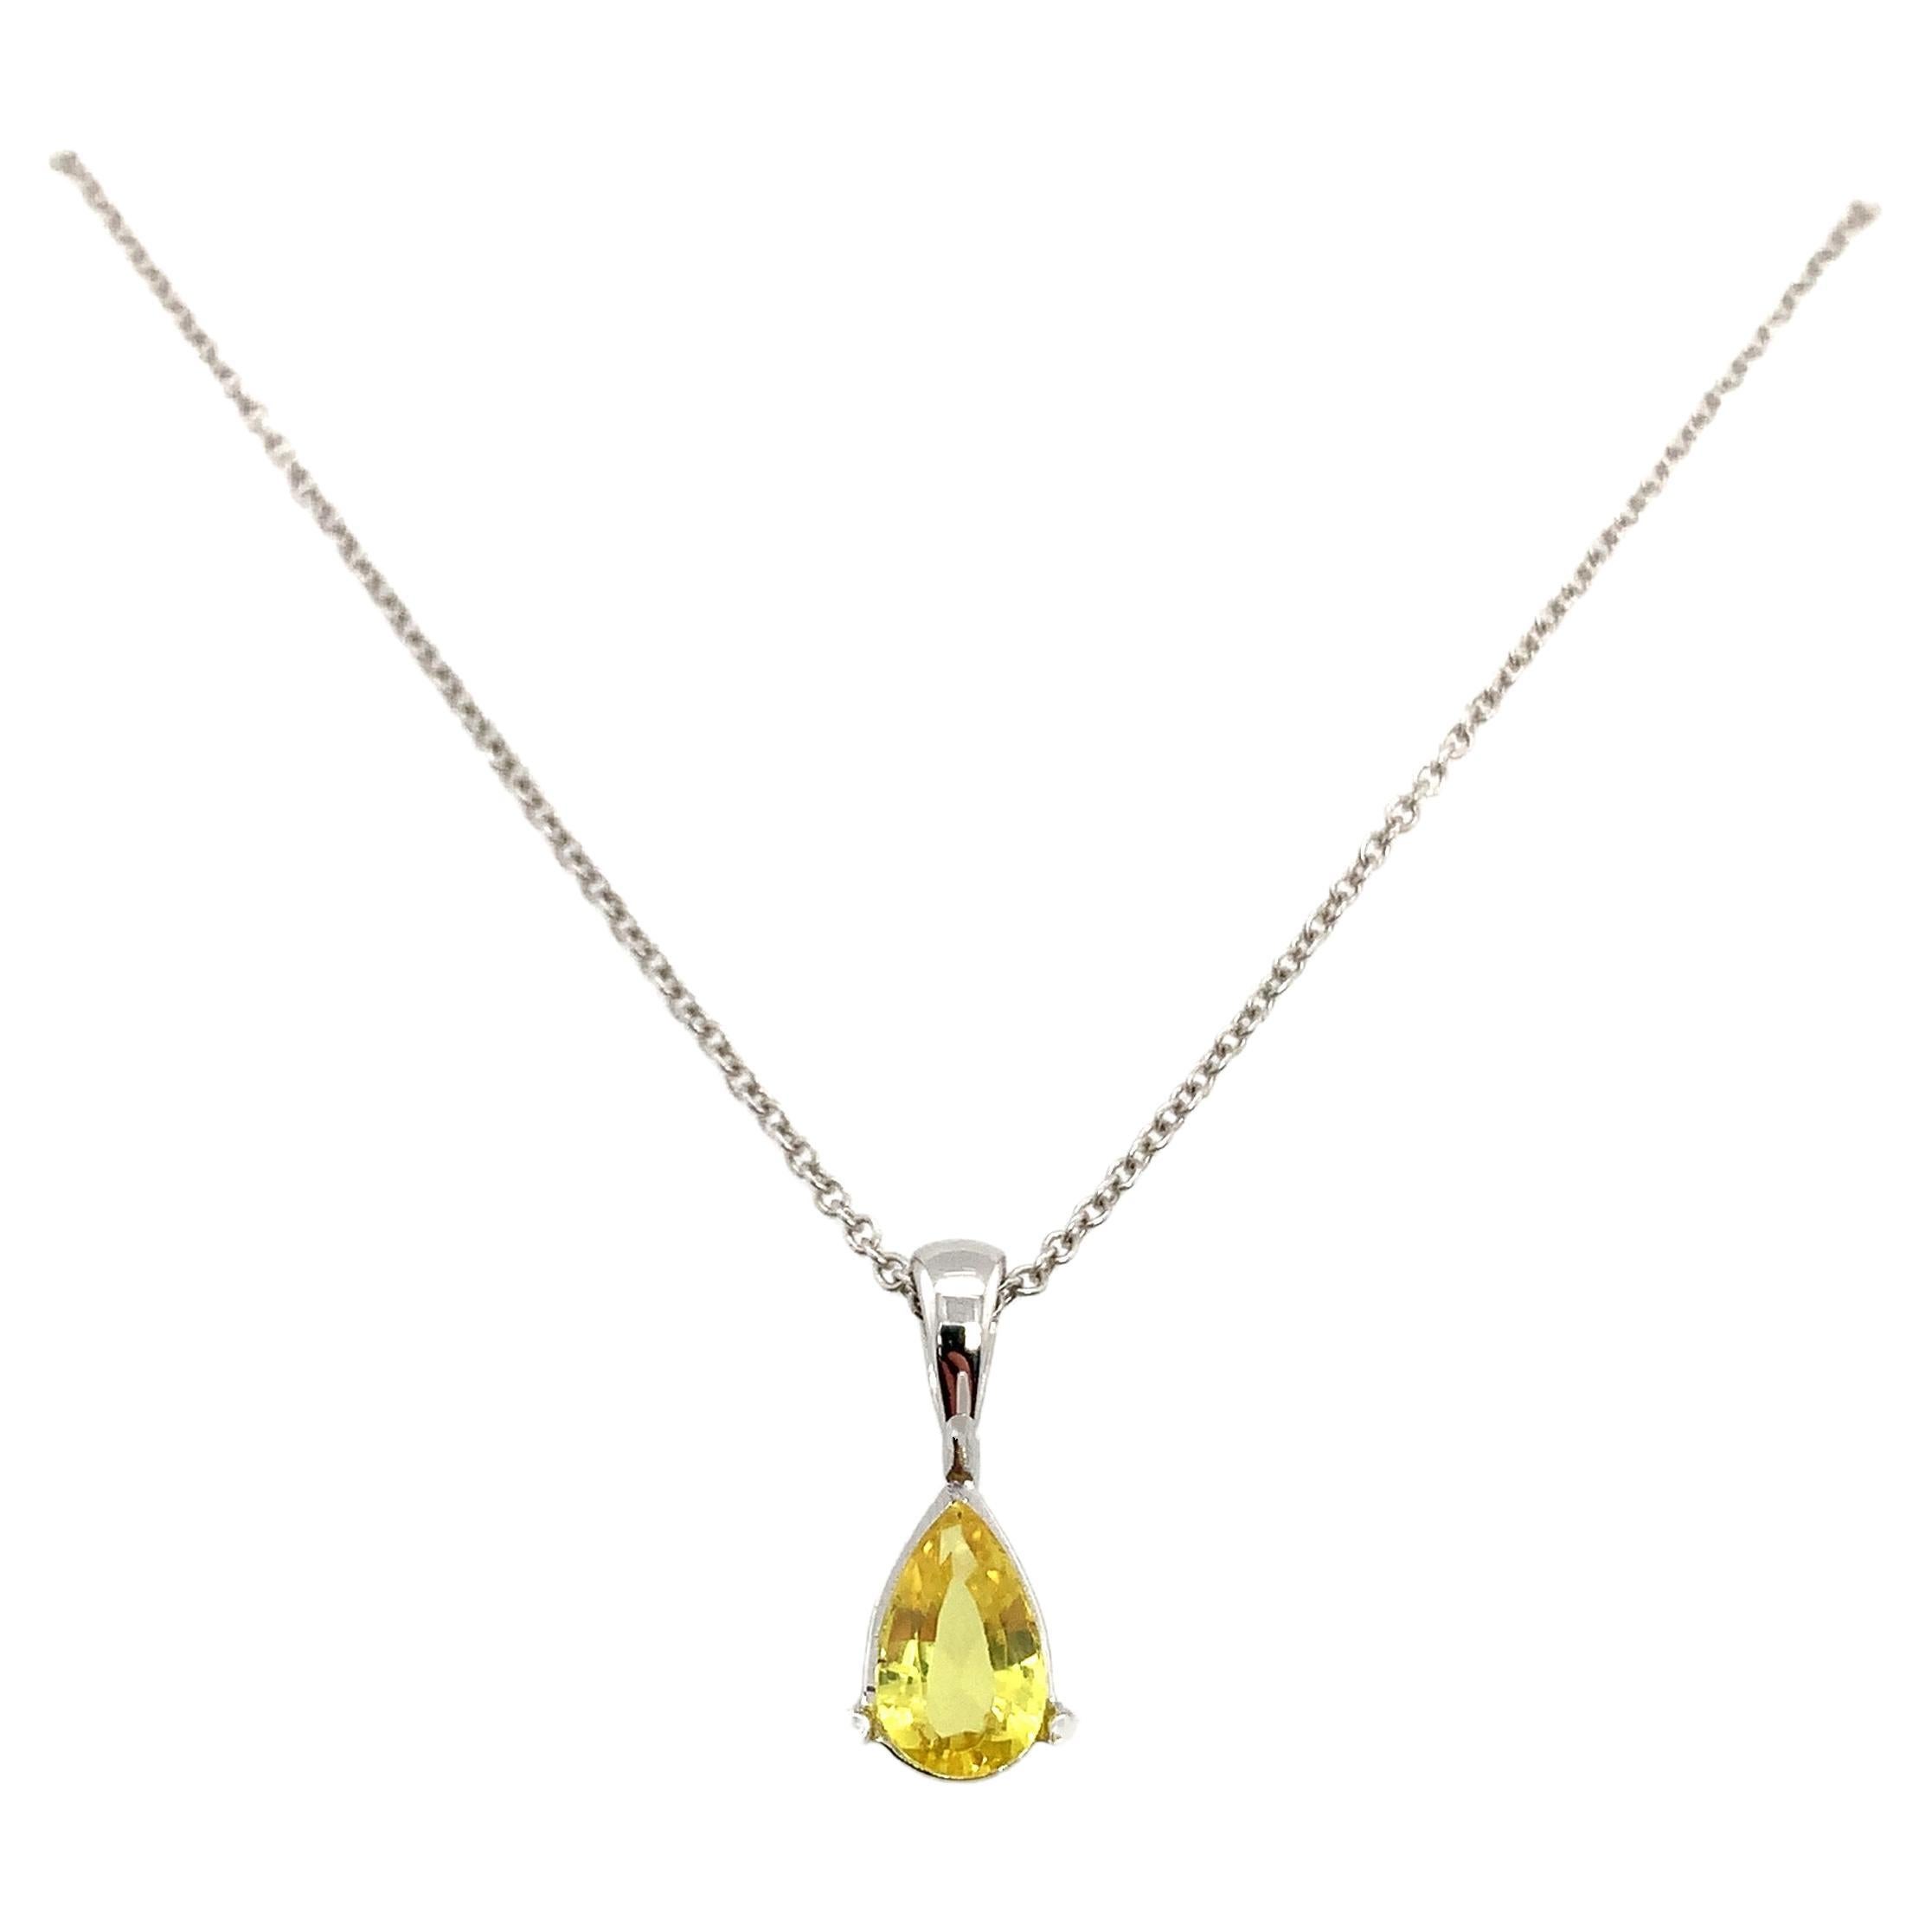 Yellow sapphire solitaire pendant necklace 18k white gold